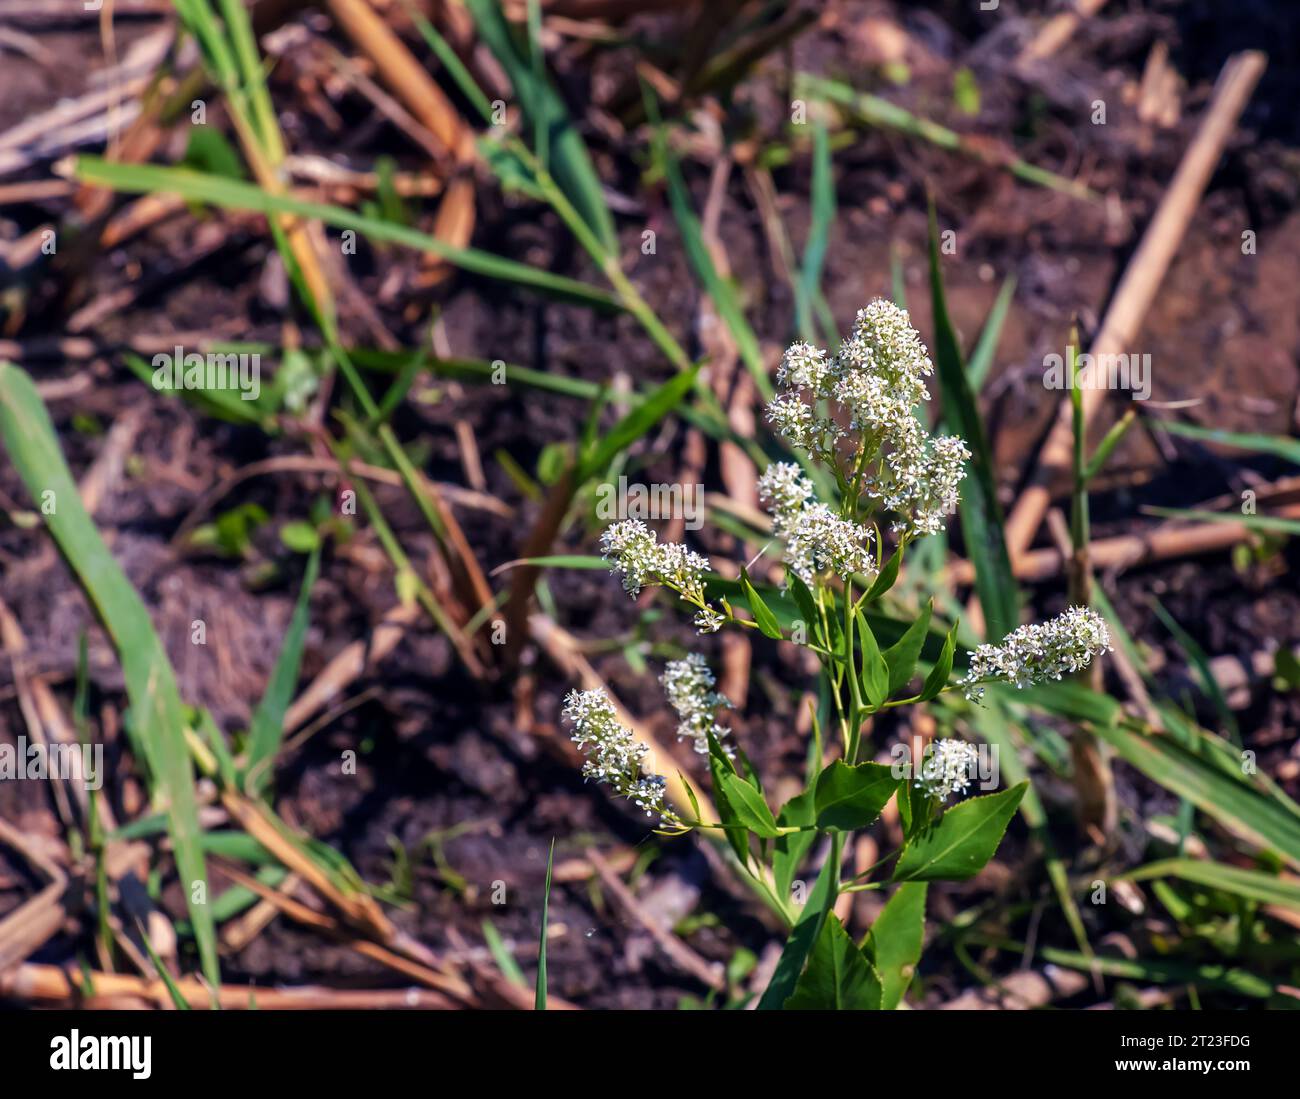 Lepidium blooming with white flowers close up. It has a strong unpleasant odor and is used as a bedbug repellent. Stock Photo